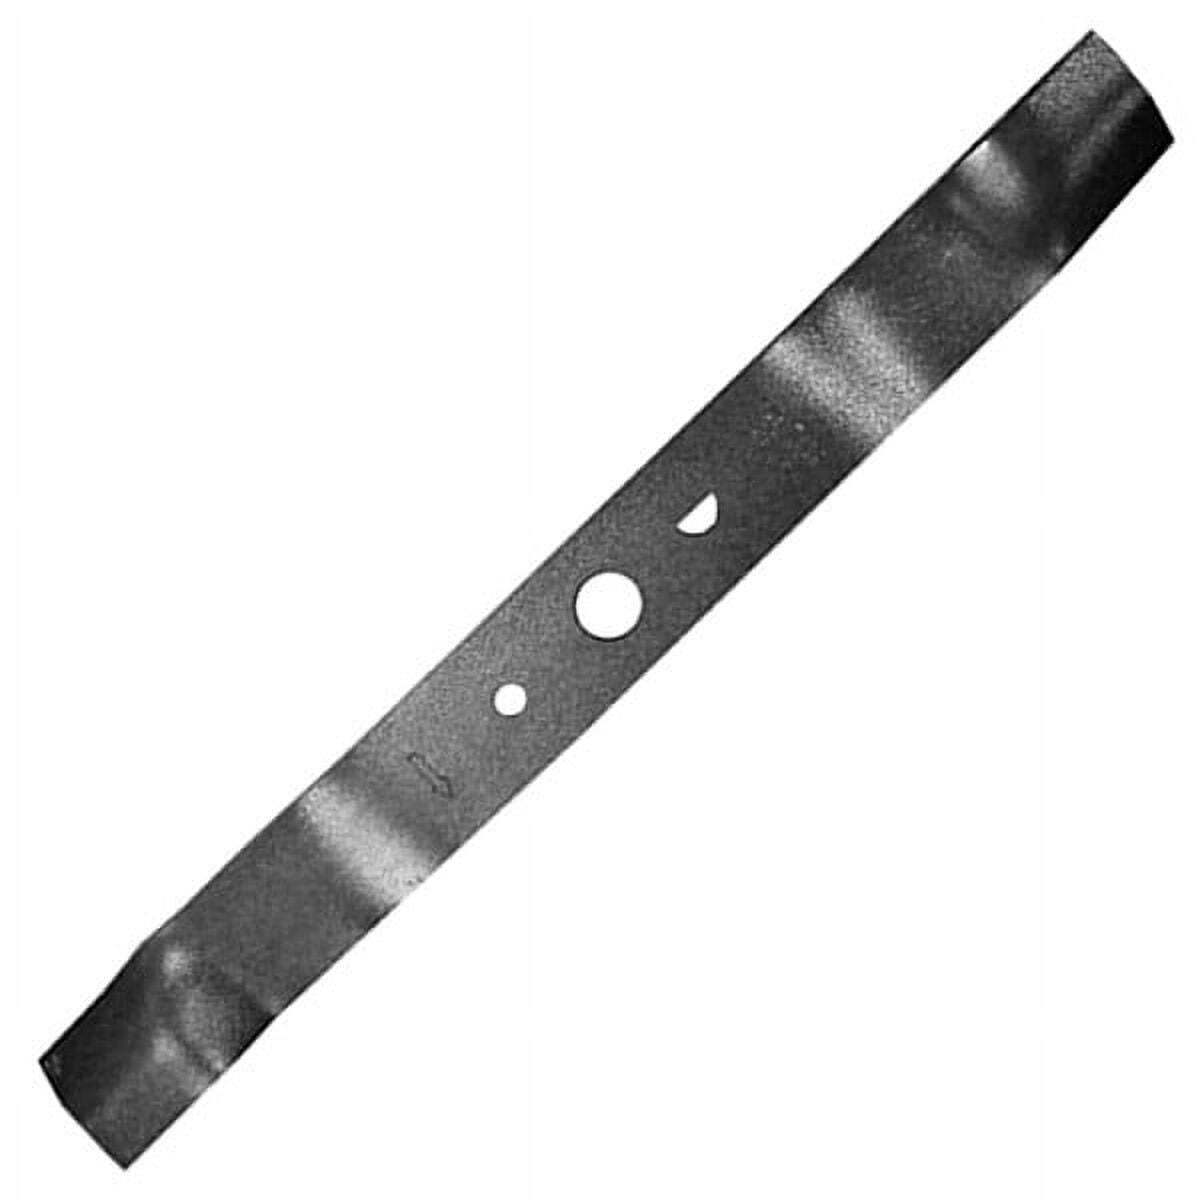 Greenworks 29512 Replacement Lawn Mower Blade, 16-Inch